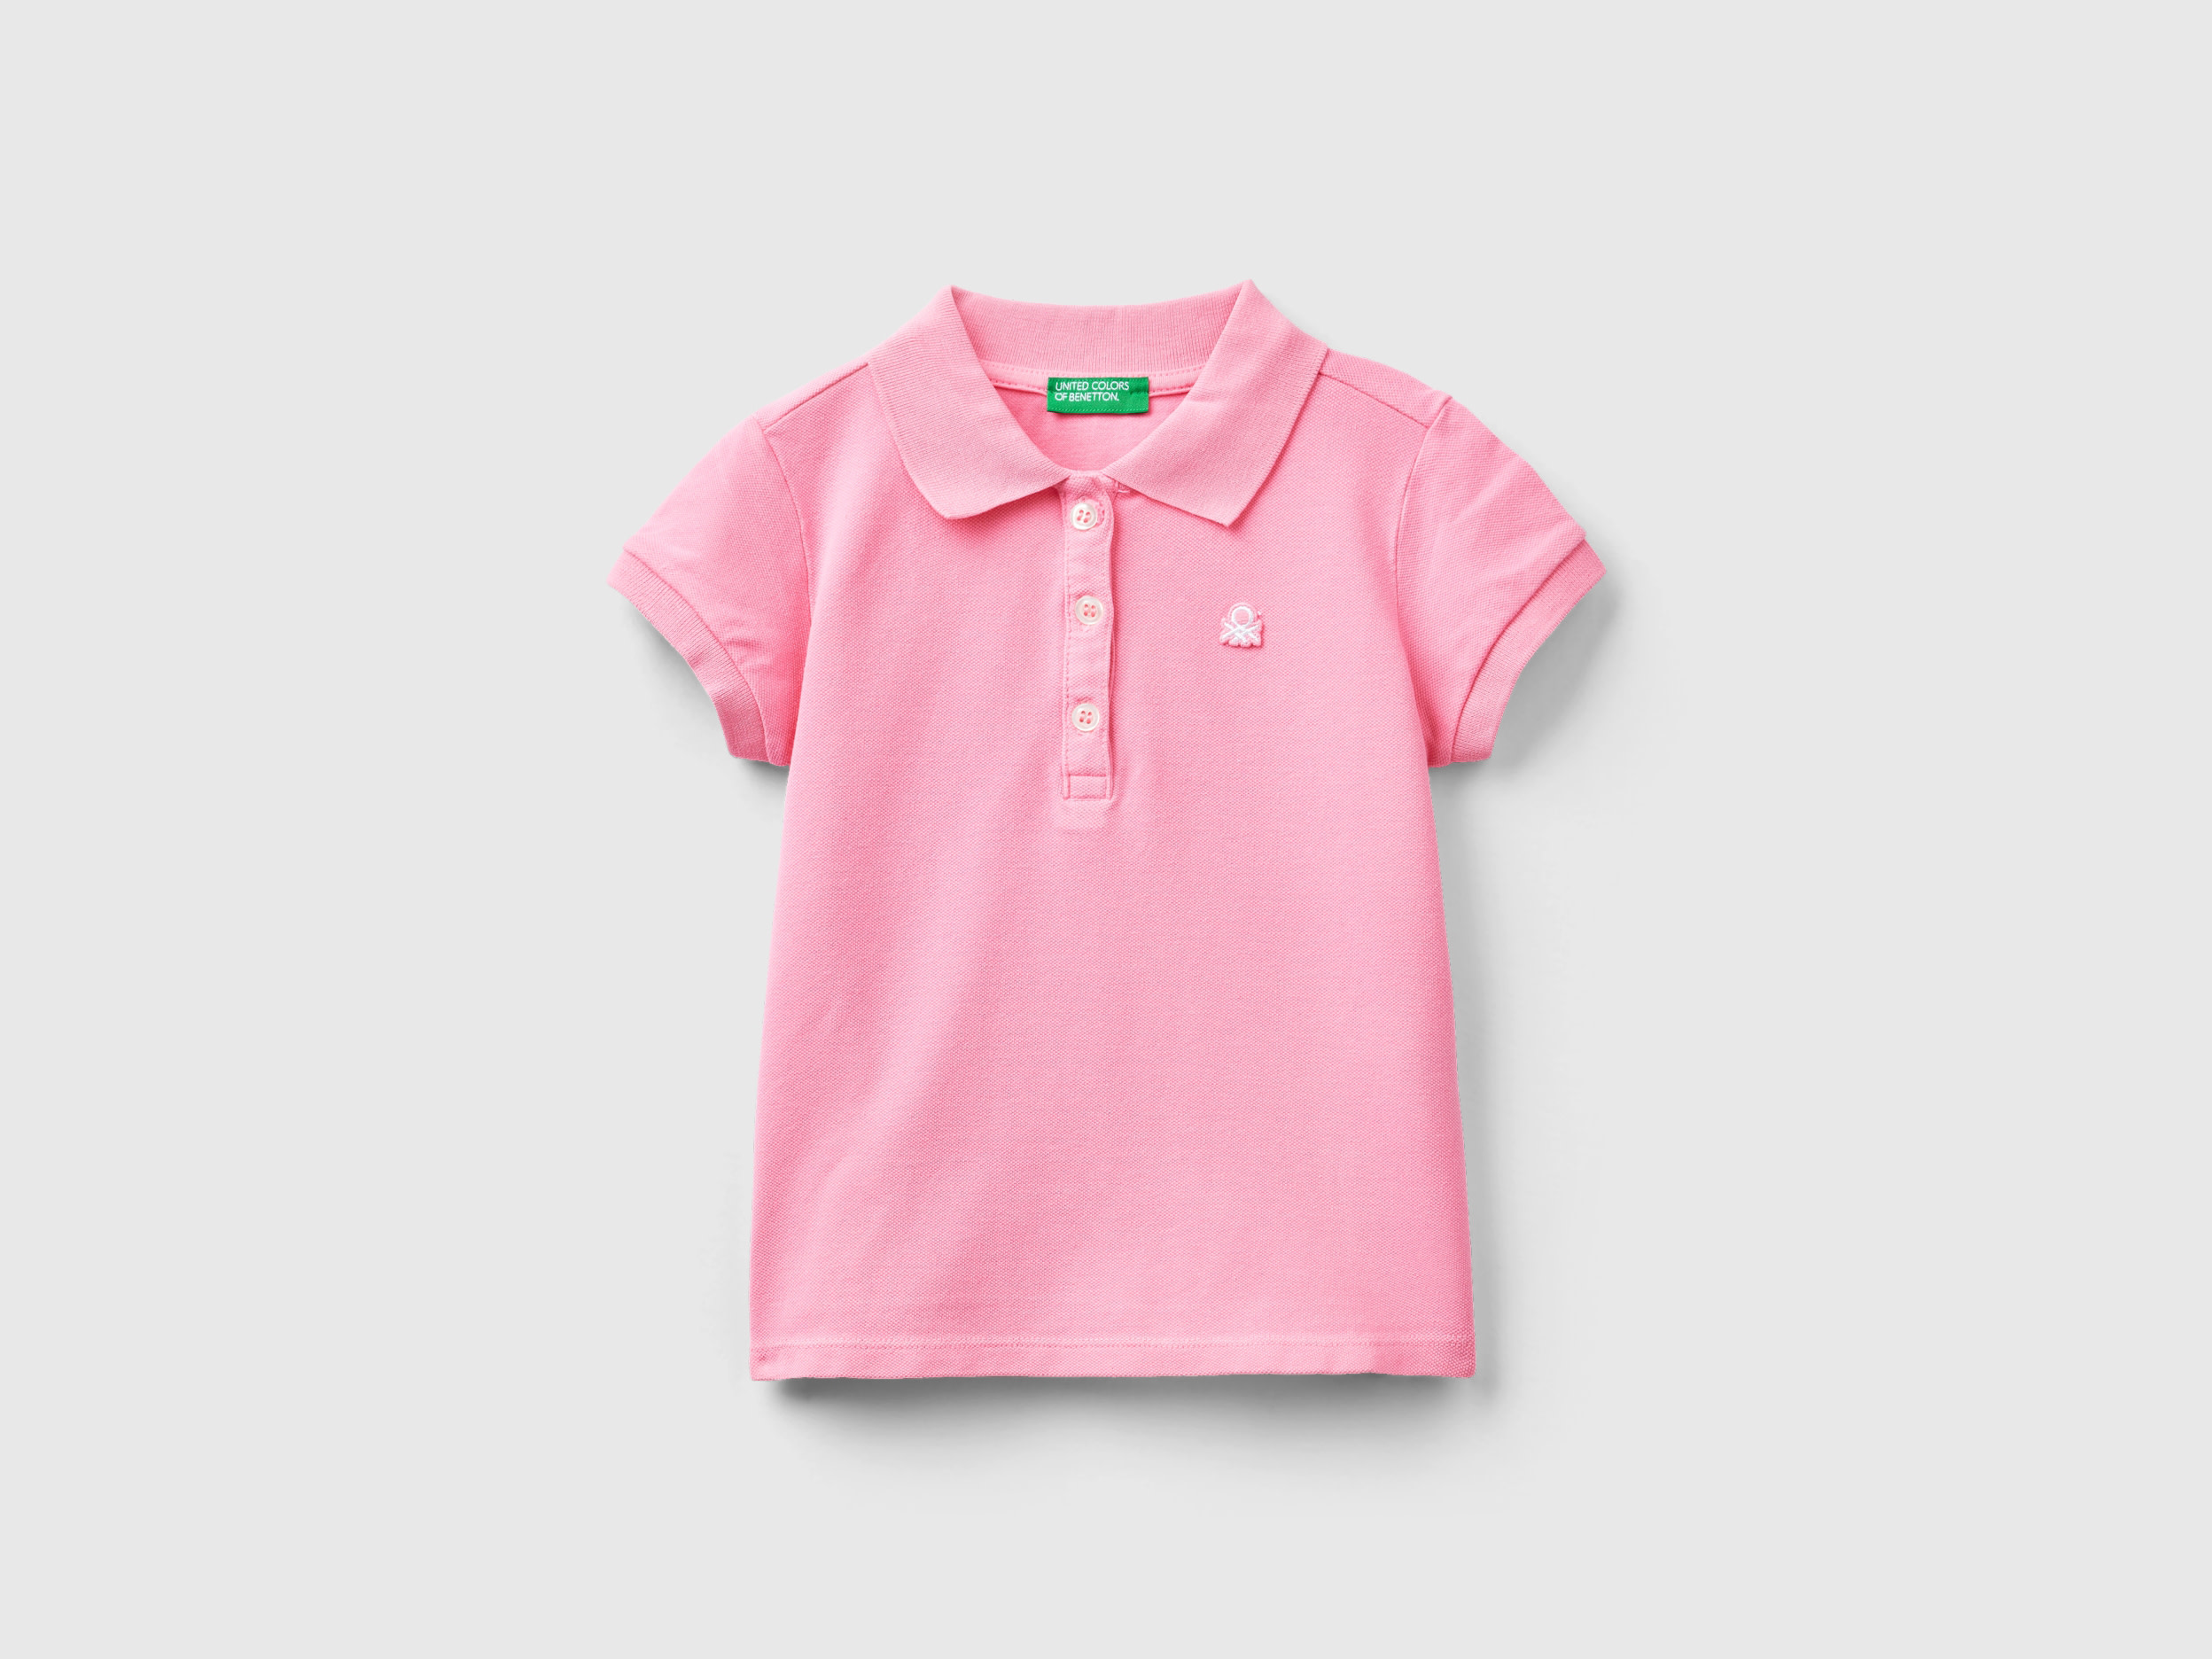 Image of Benetton, Regular Fit Polo In Organic Cotton, size 82, Pink, Kids